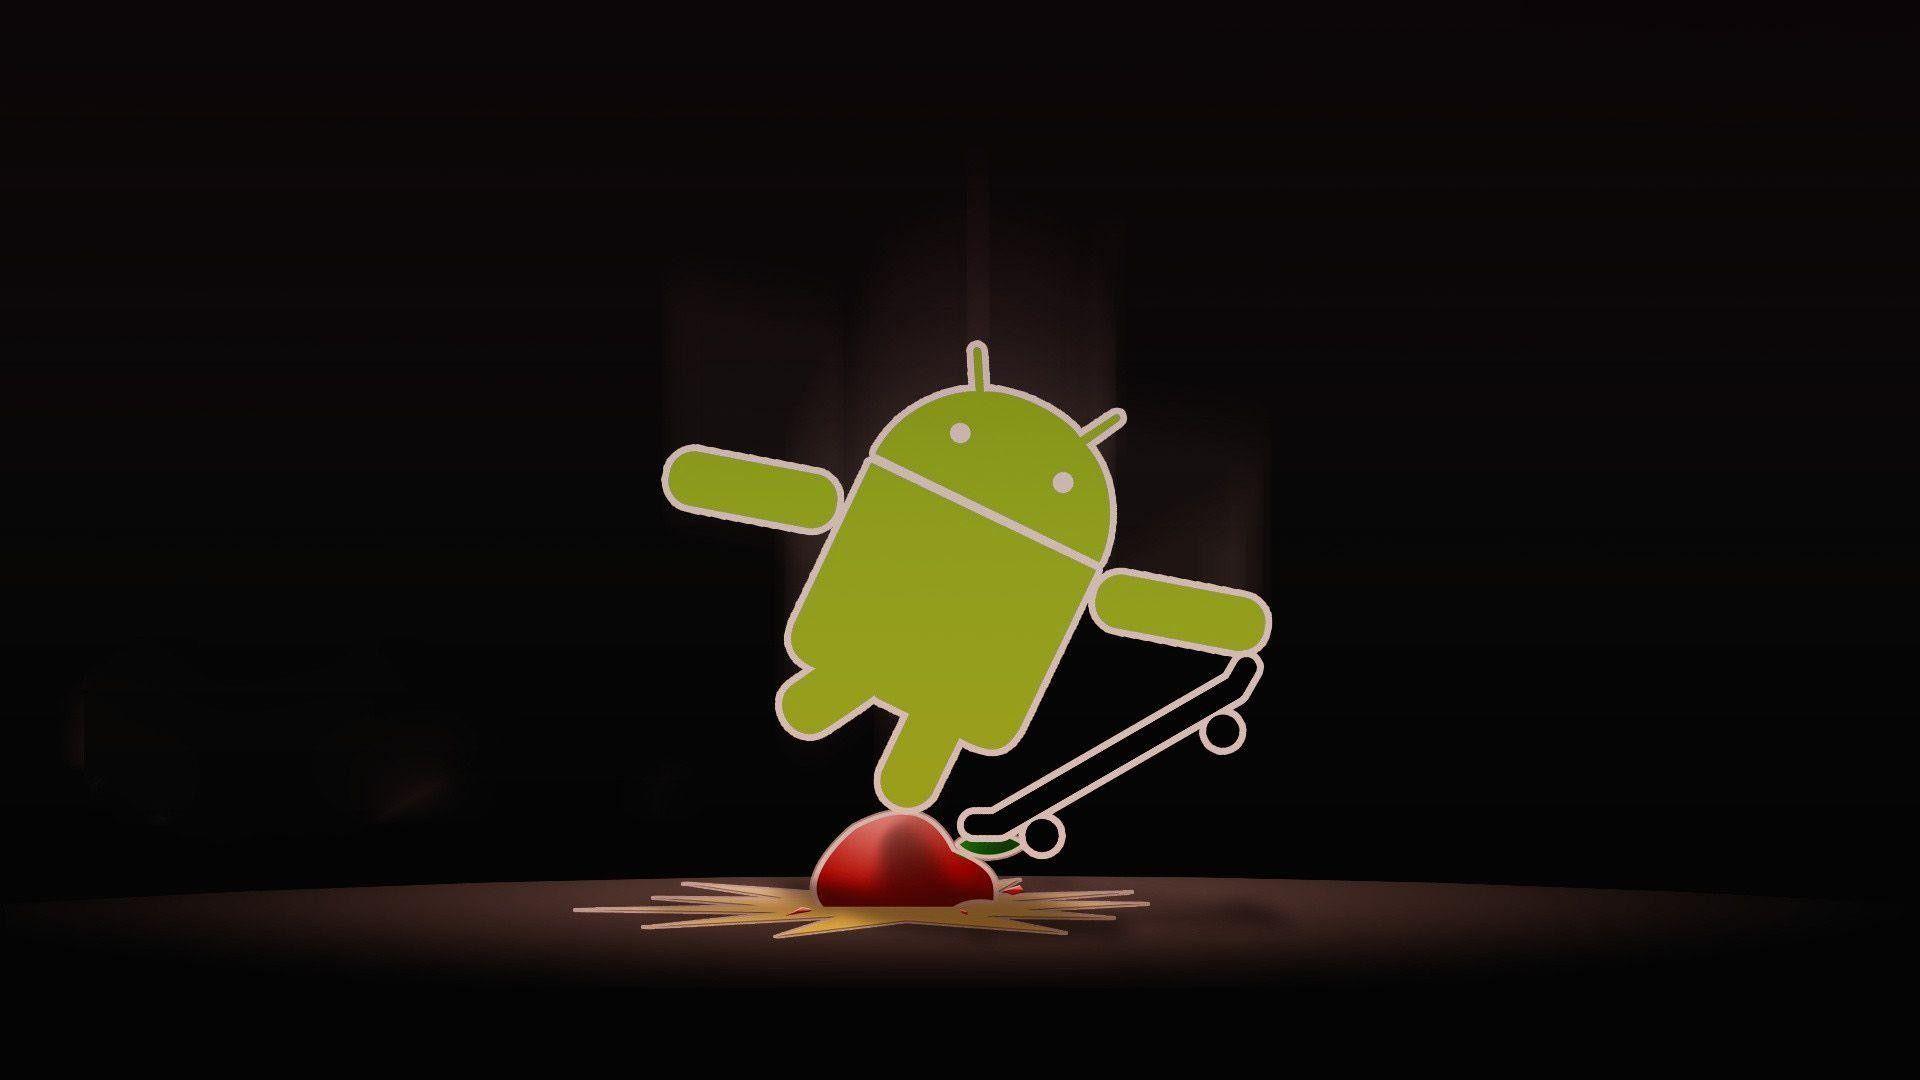 Droid Background